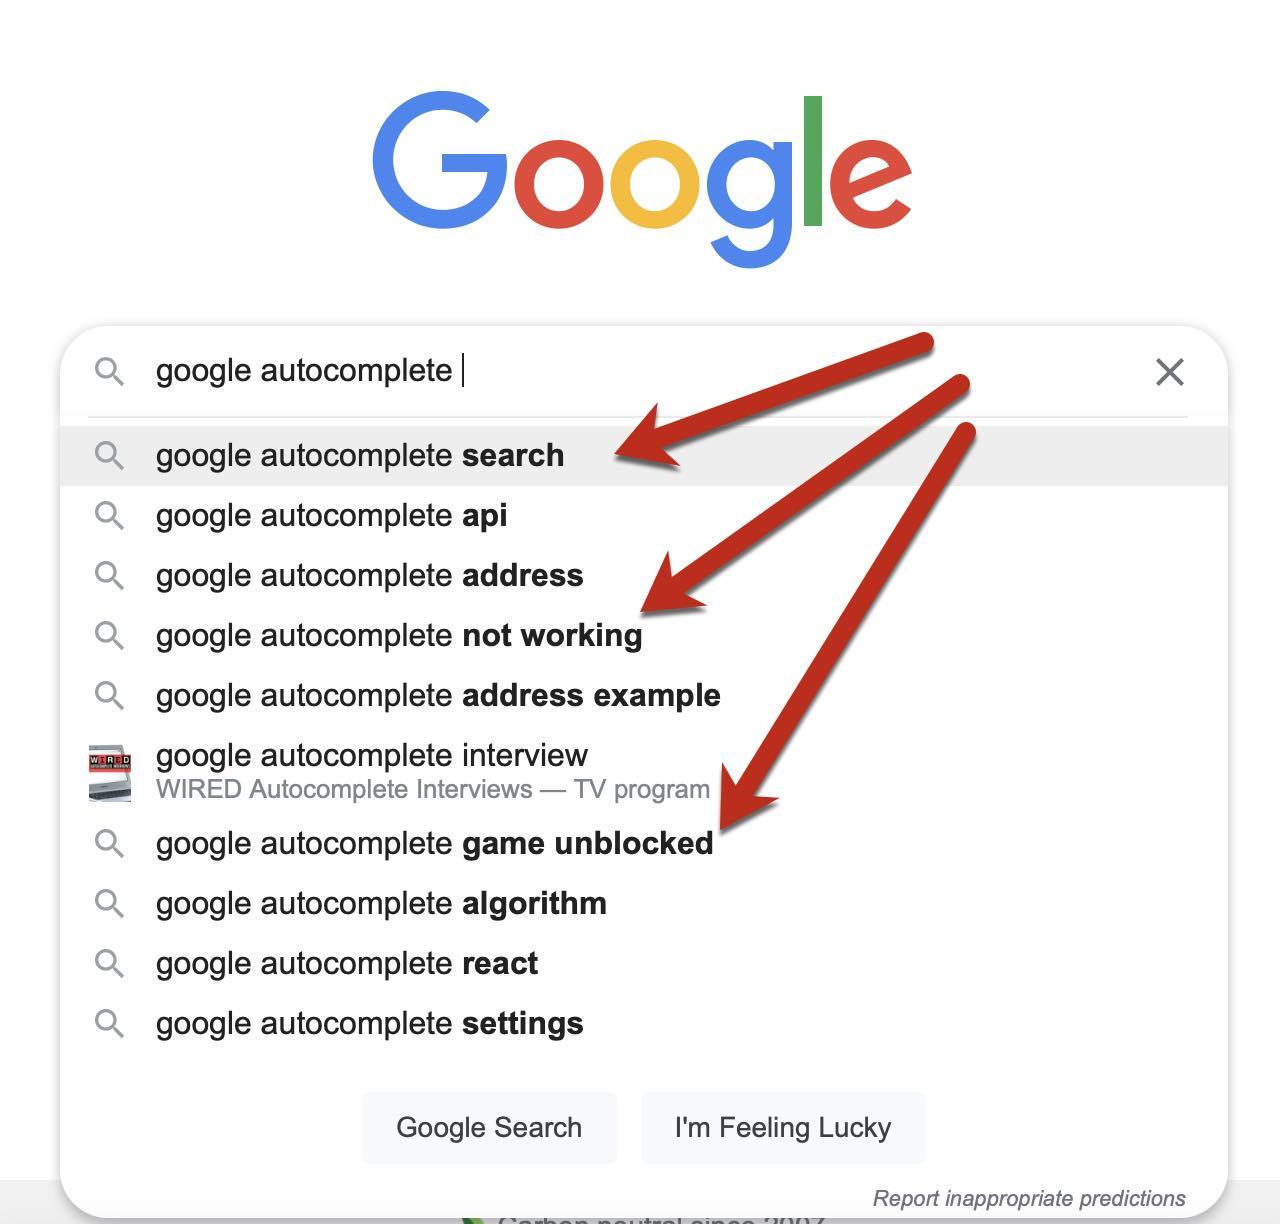 Screenshot of a Google autocomplete screen for the query "google autocomplete"